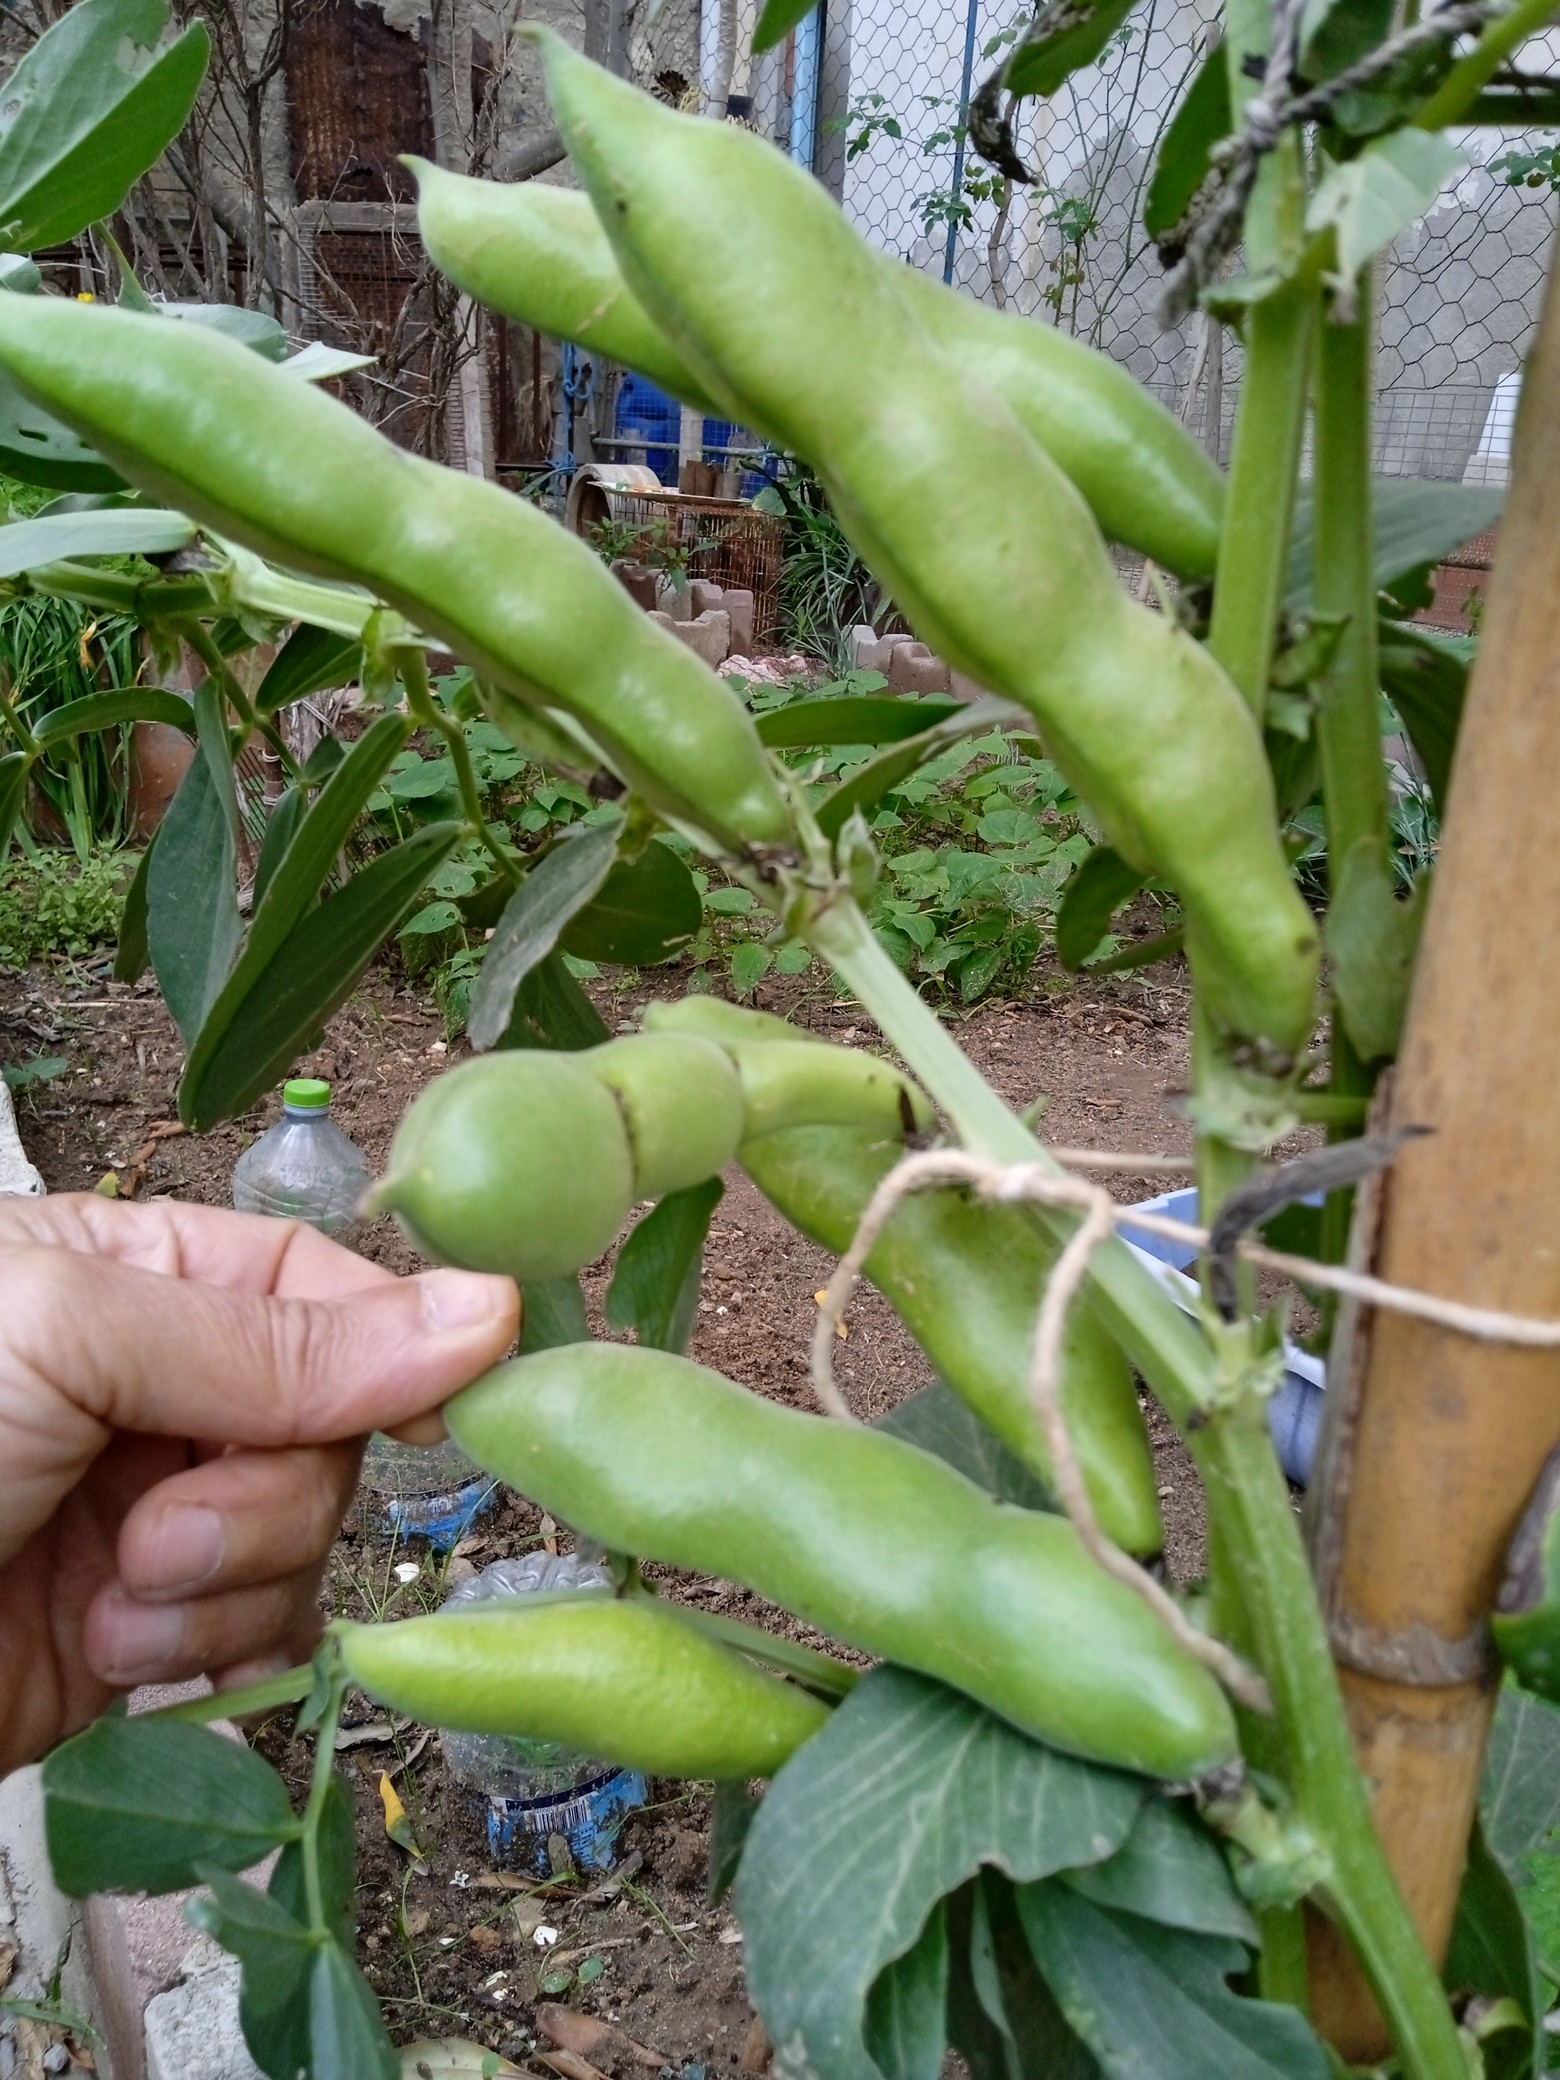 Organic broad beans are full of protein, fiber, calcium, minerals, they offer impressive health effects. These tasty nutritious vegetables are one of the easiest to grow!